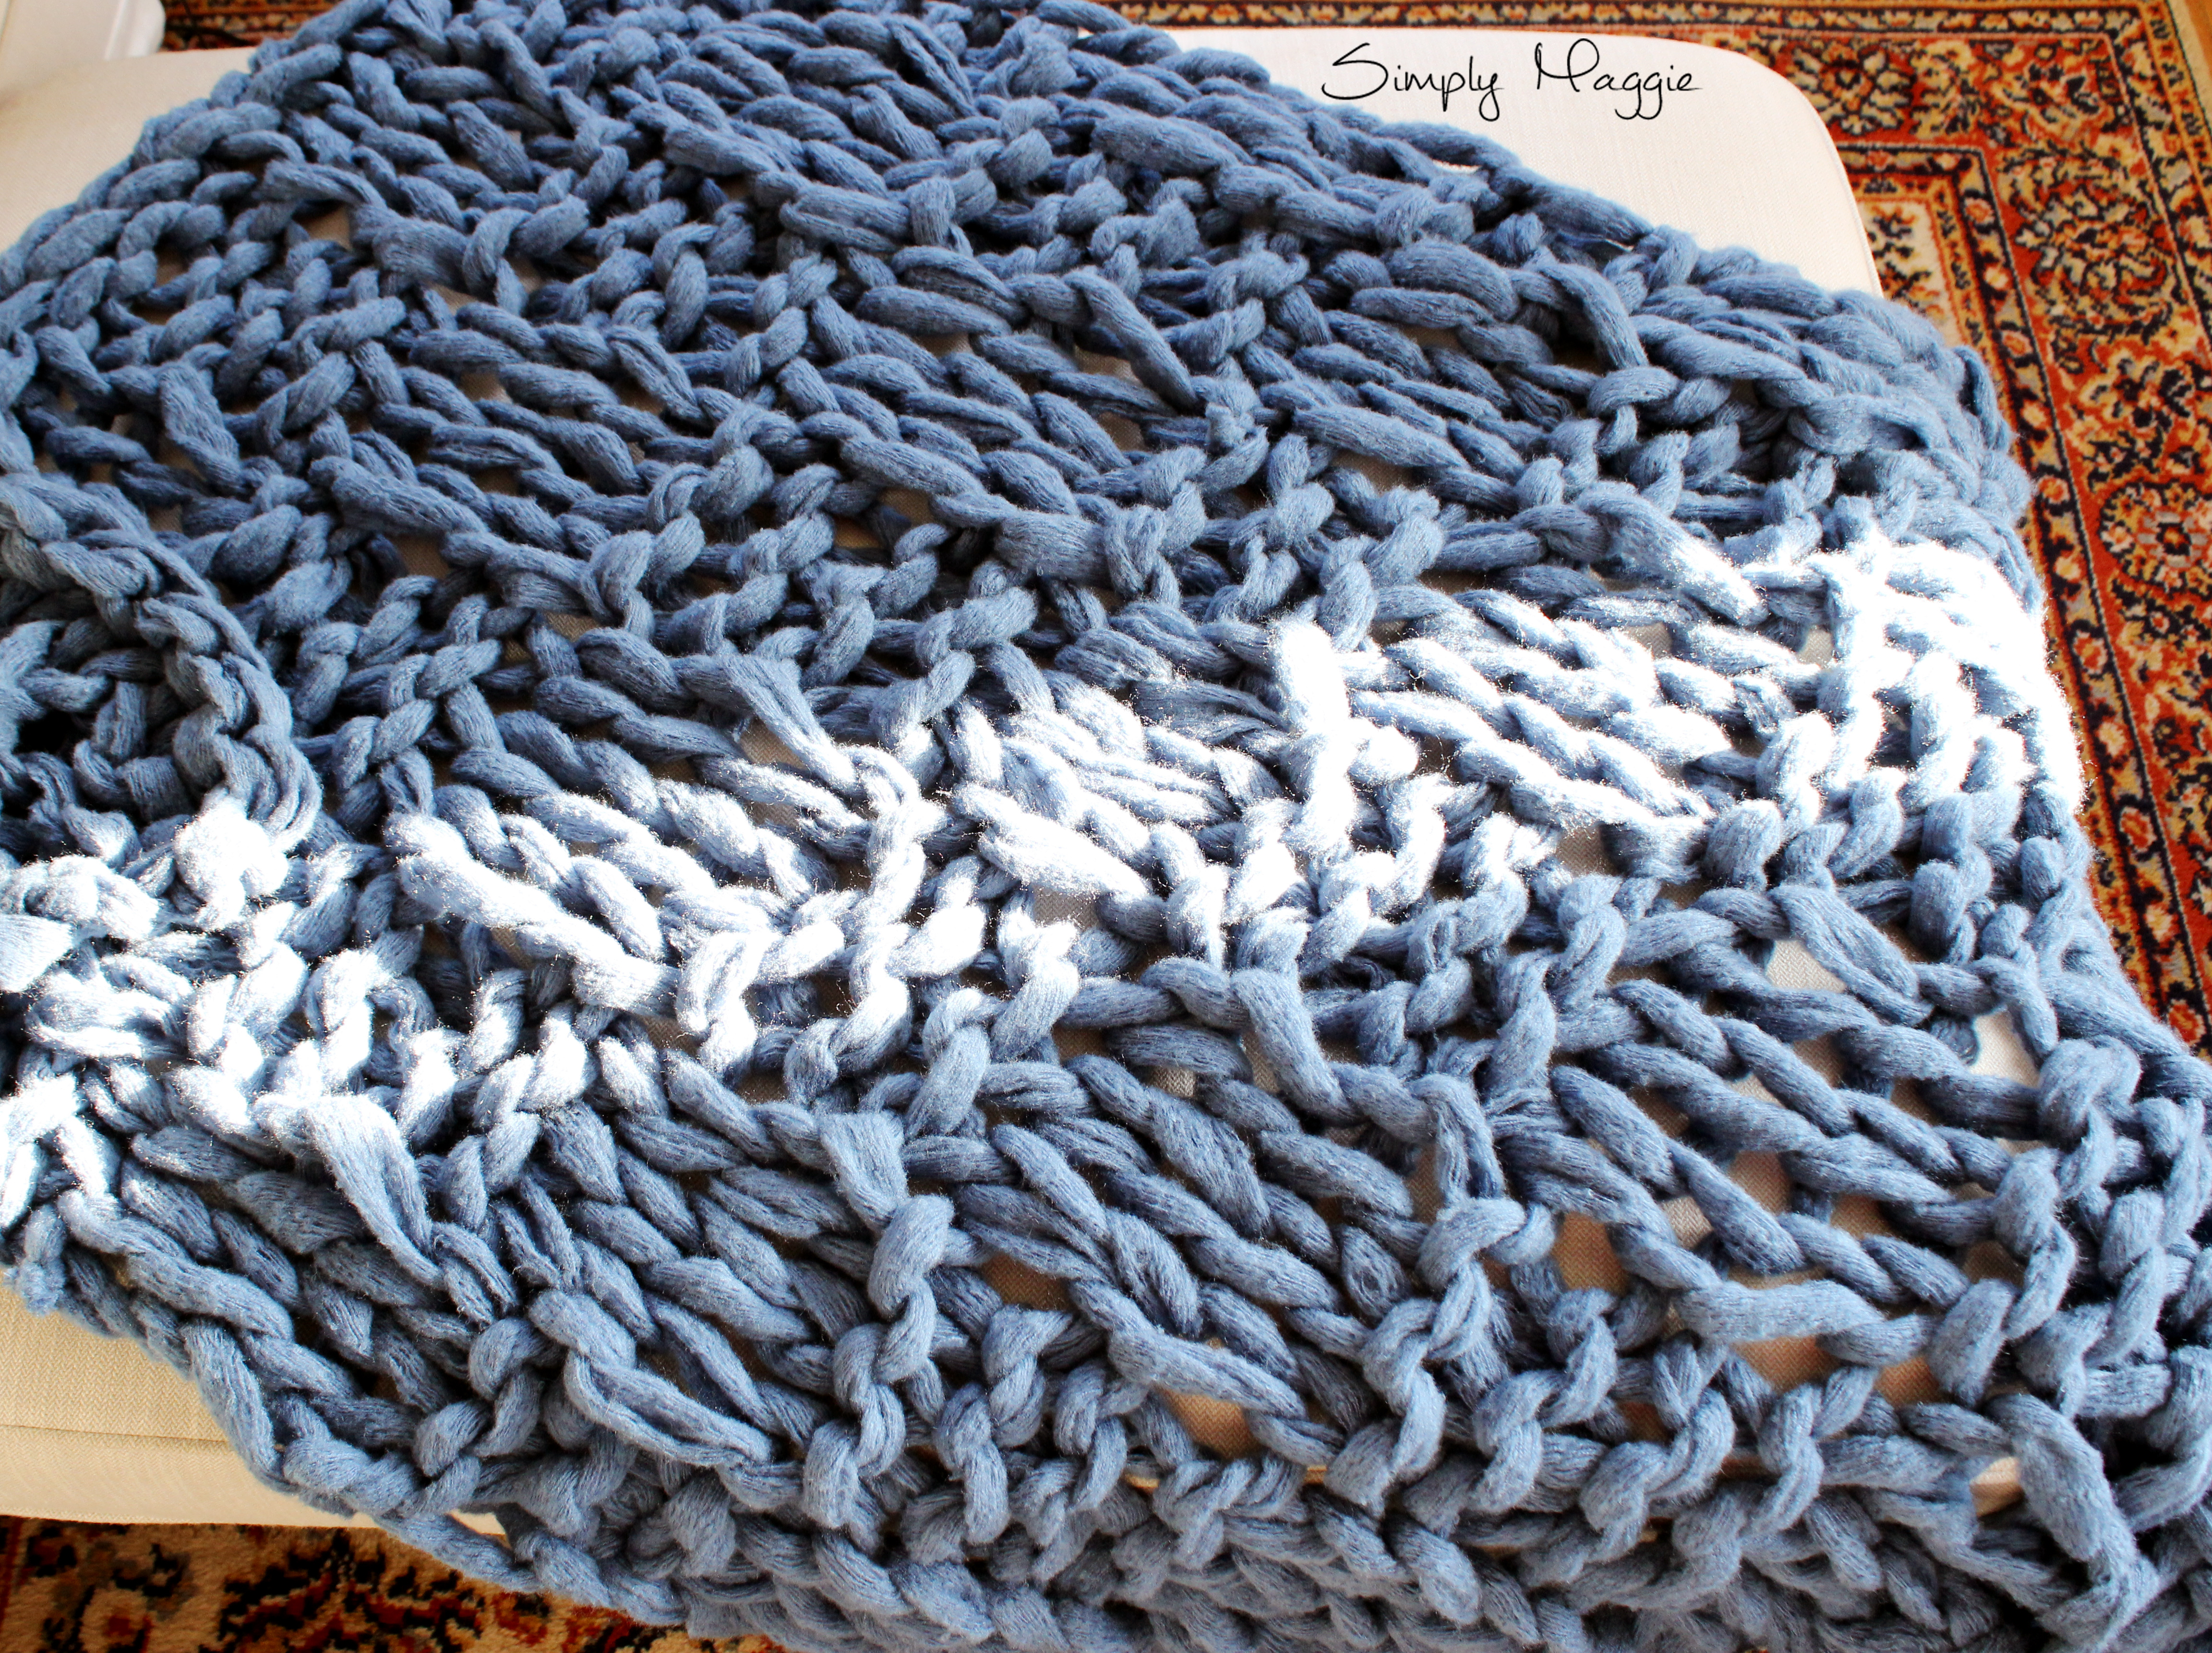 Basket Weave Crochet Pattern Afghan How To Arm Knit A Basket Weave Stitch Blanket Simplymaggie